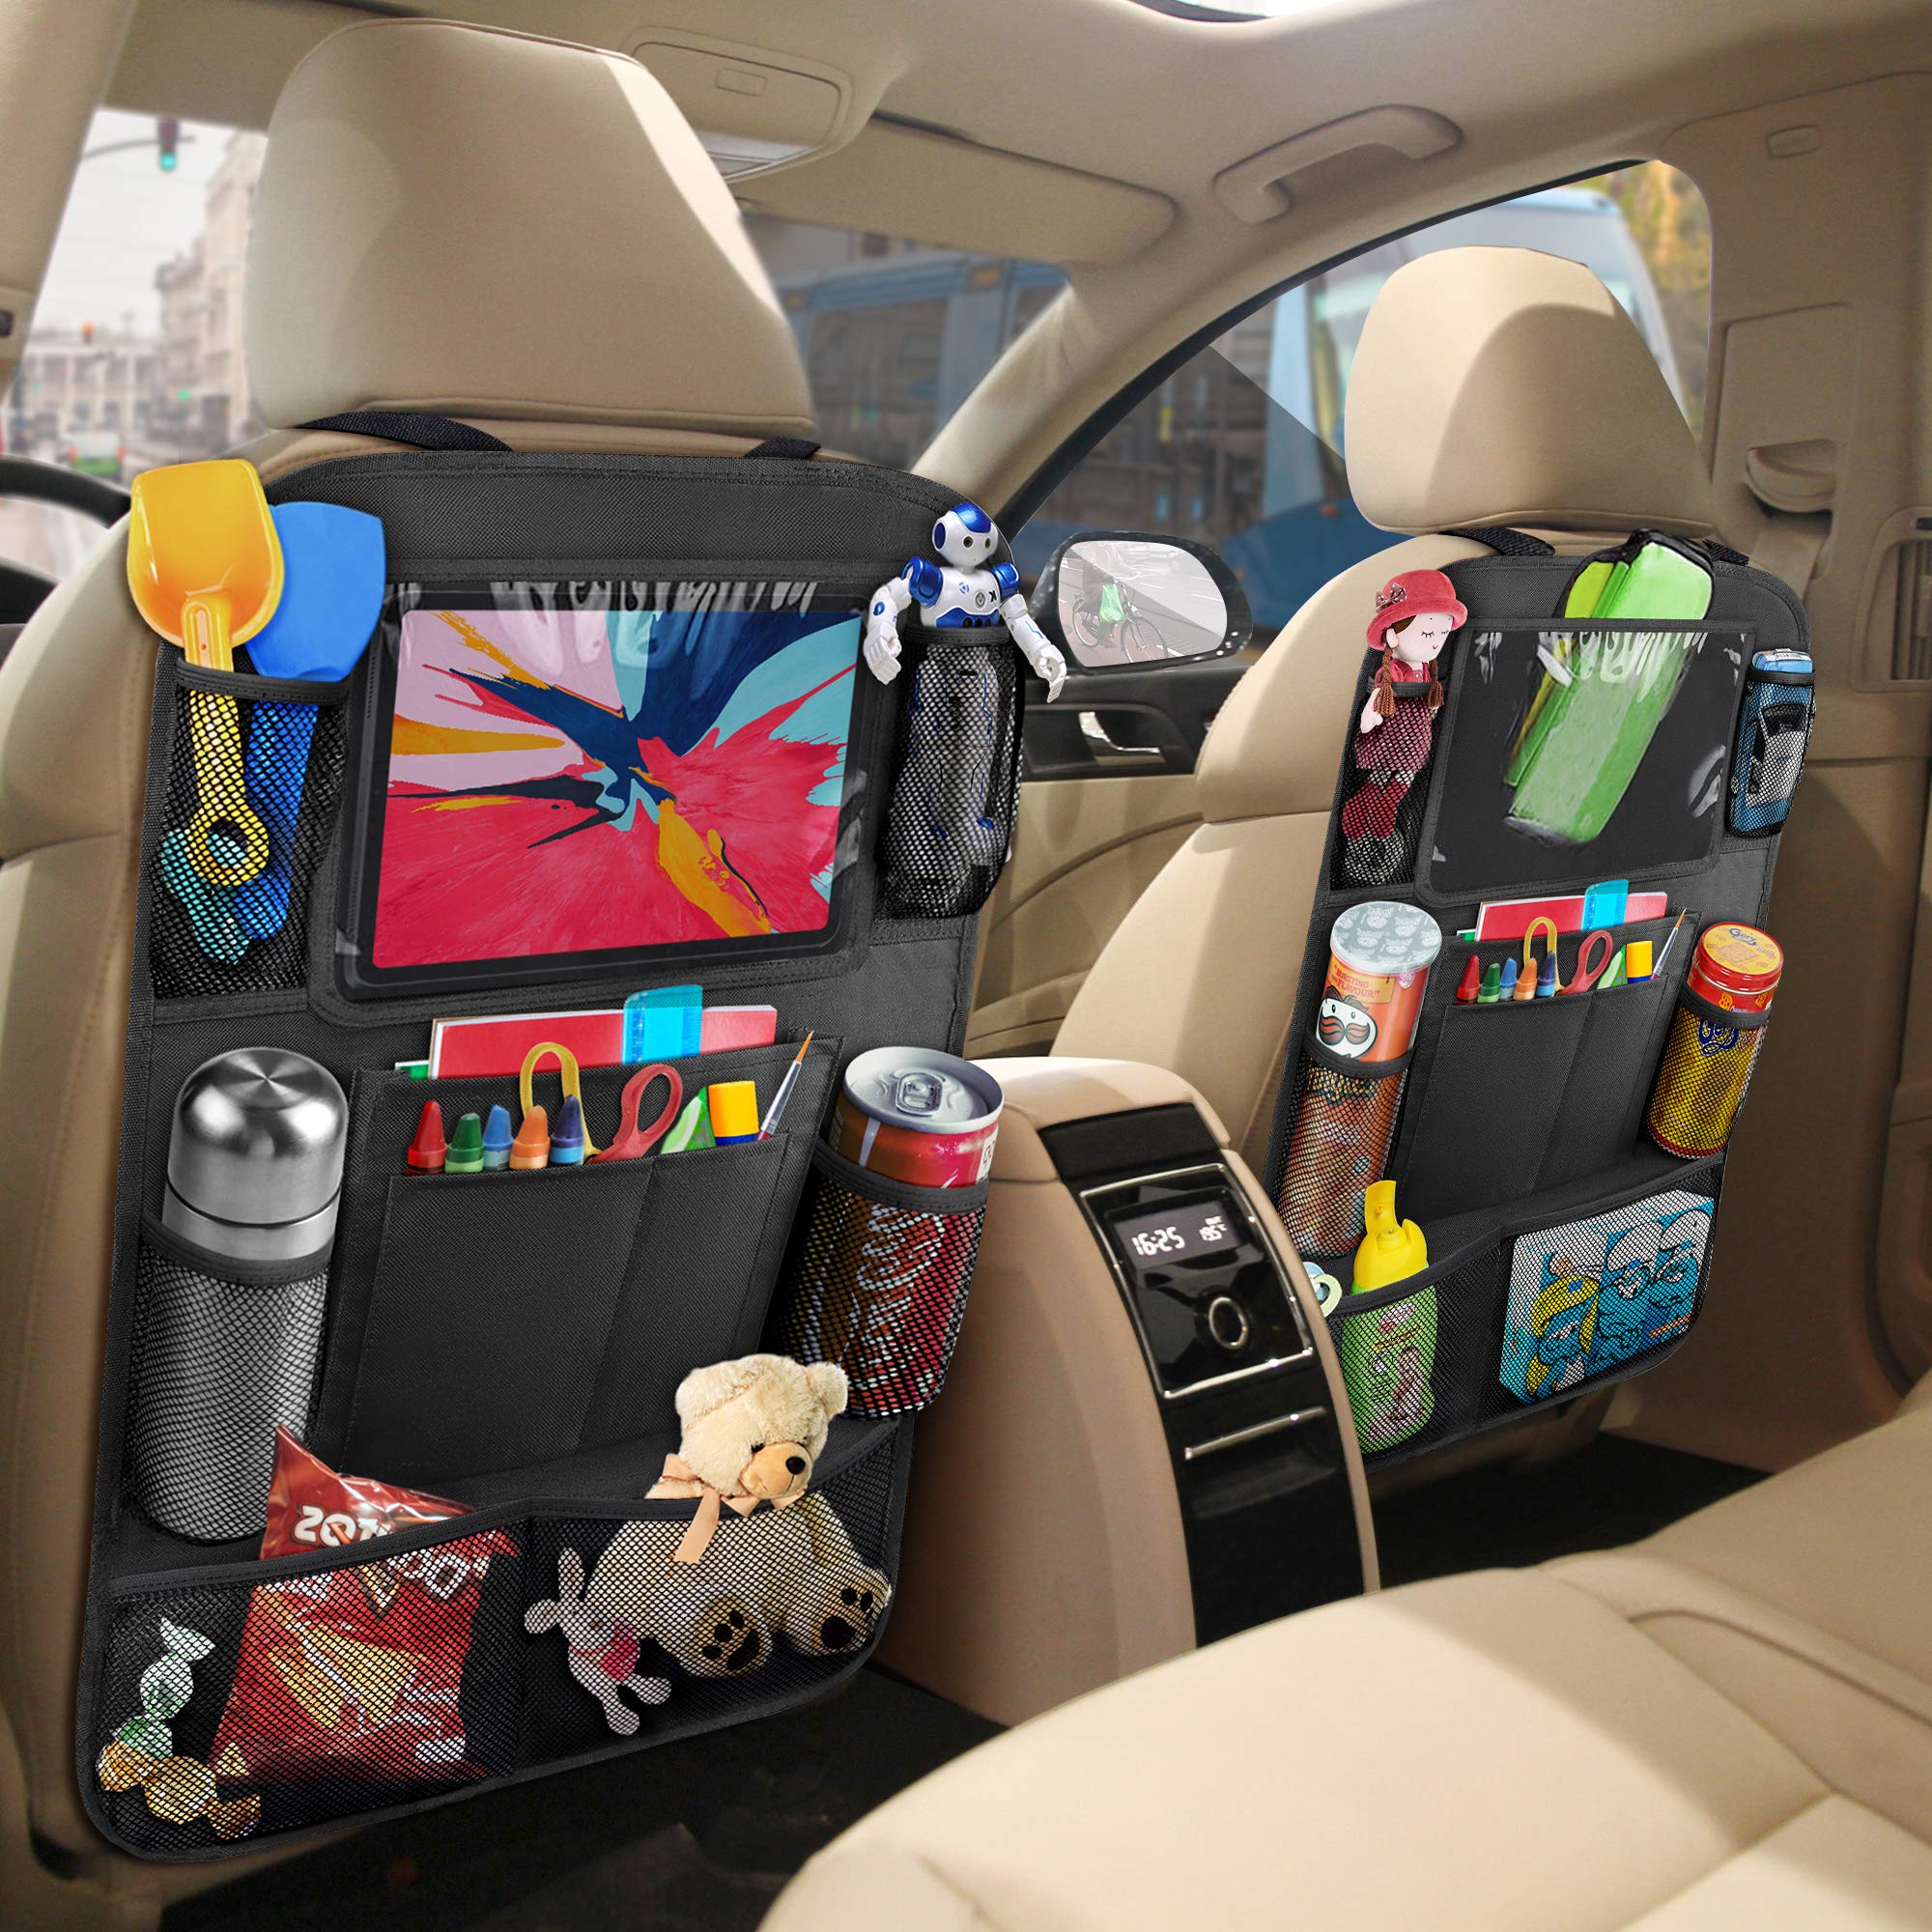 anban Car Backseat Organizer, Seat Back Protectors with 10 inch Tablet Holder + 9 Storage Pockets Kick Mats for Book Drink Toy Bottle, Travel Accessories for Kids Toddlers Black, 2 Pack